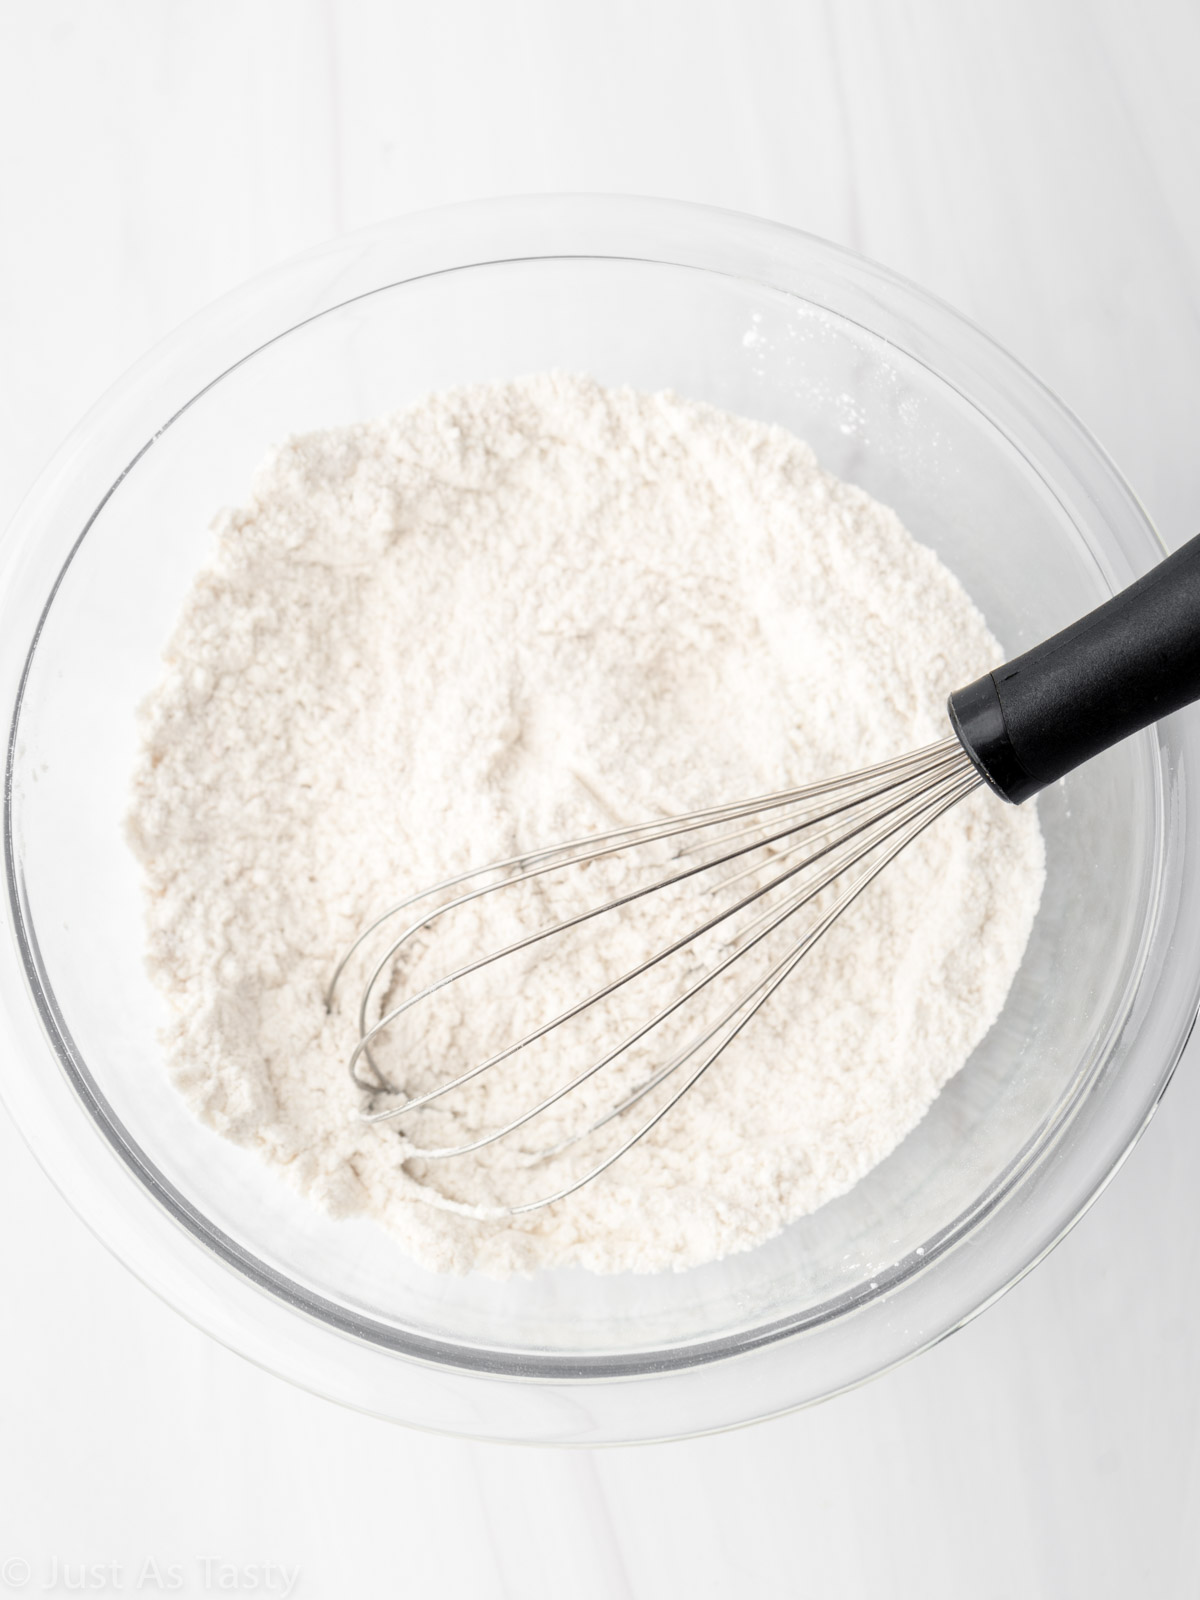 Dry ingredients and whisk in a bowl.